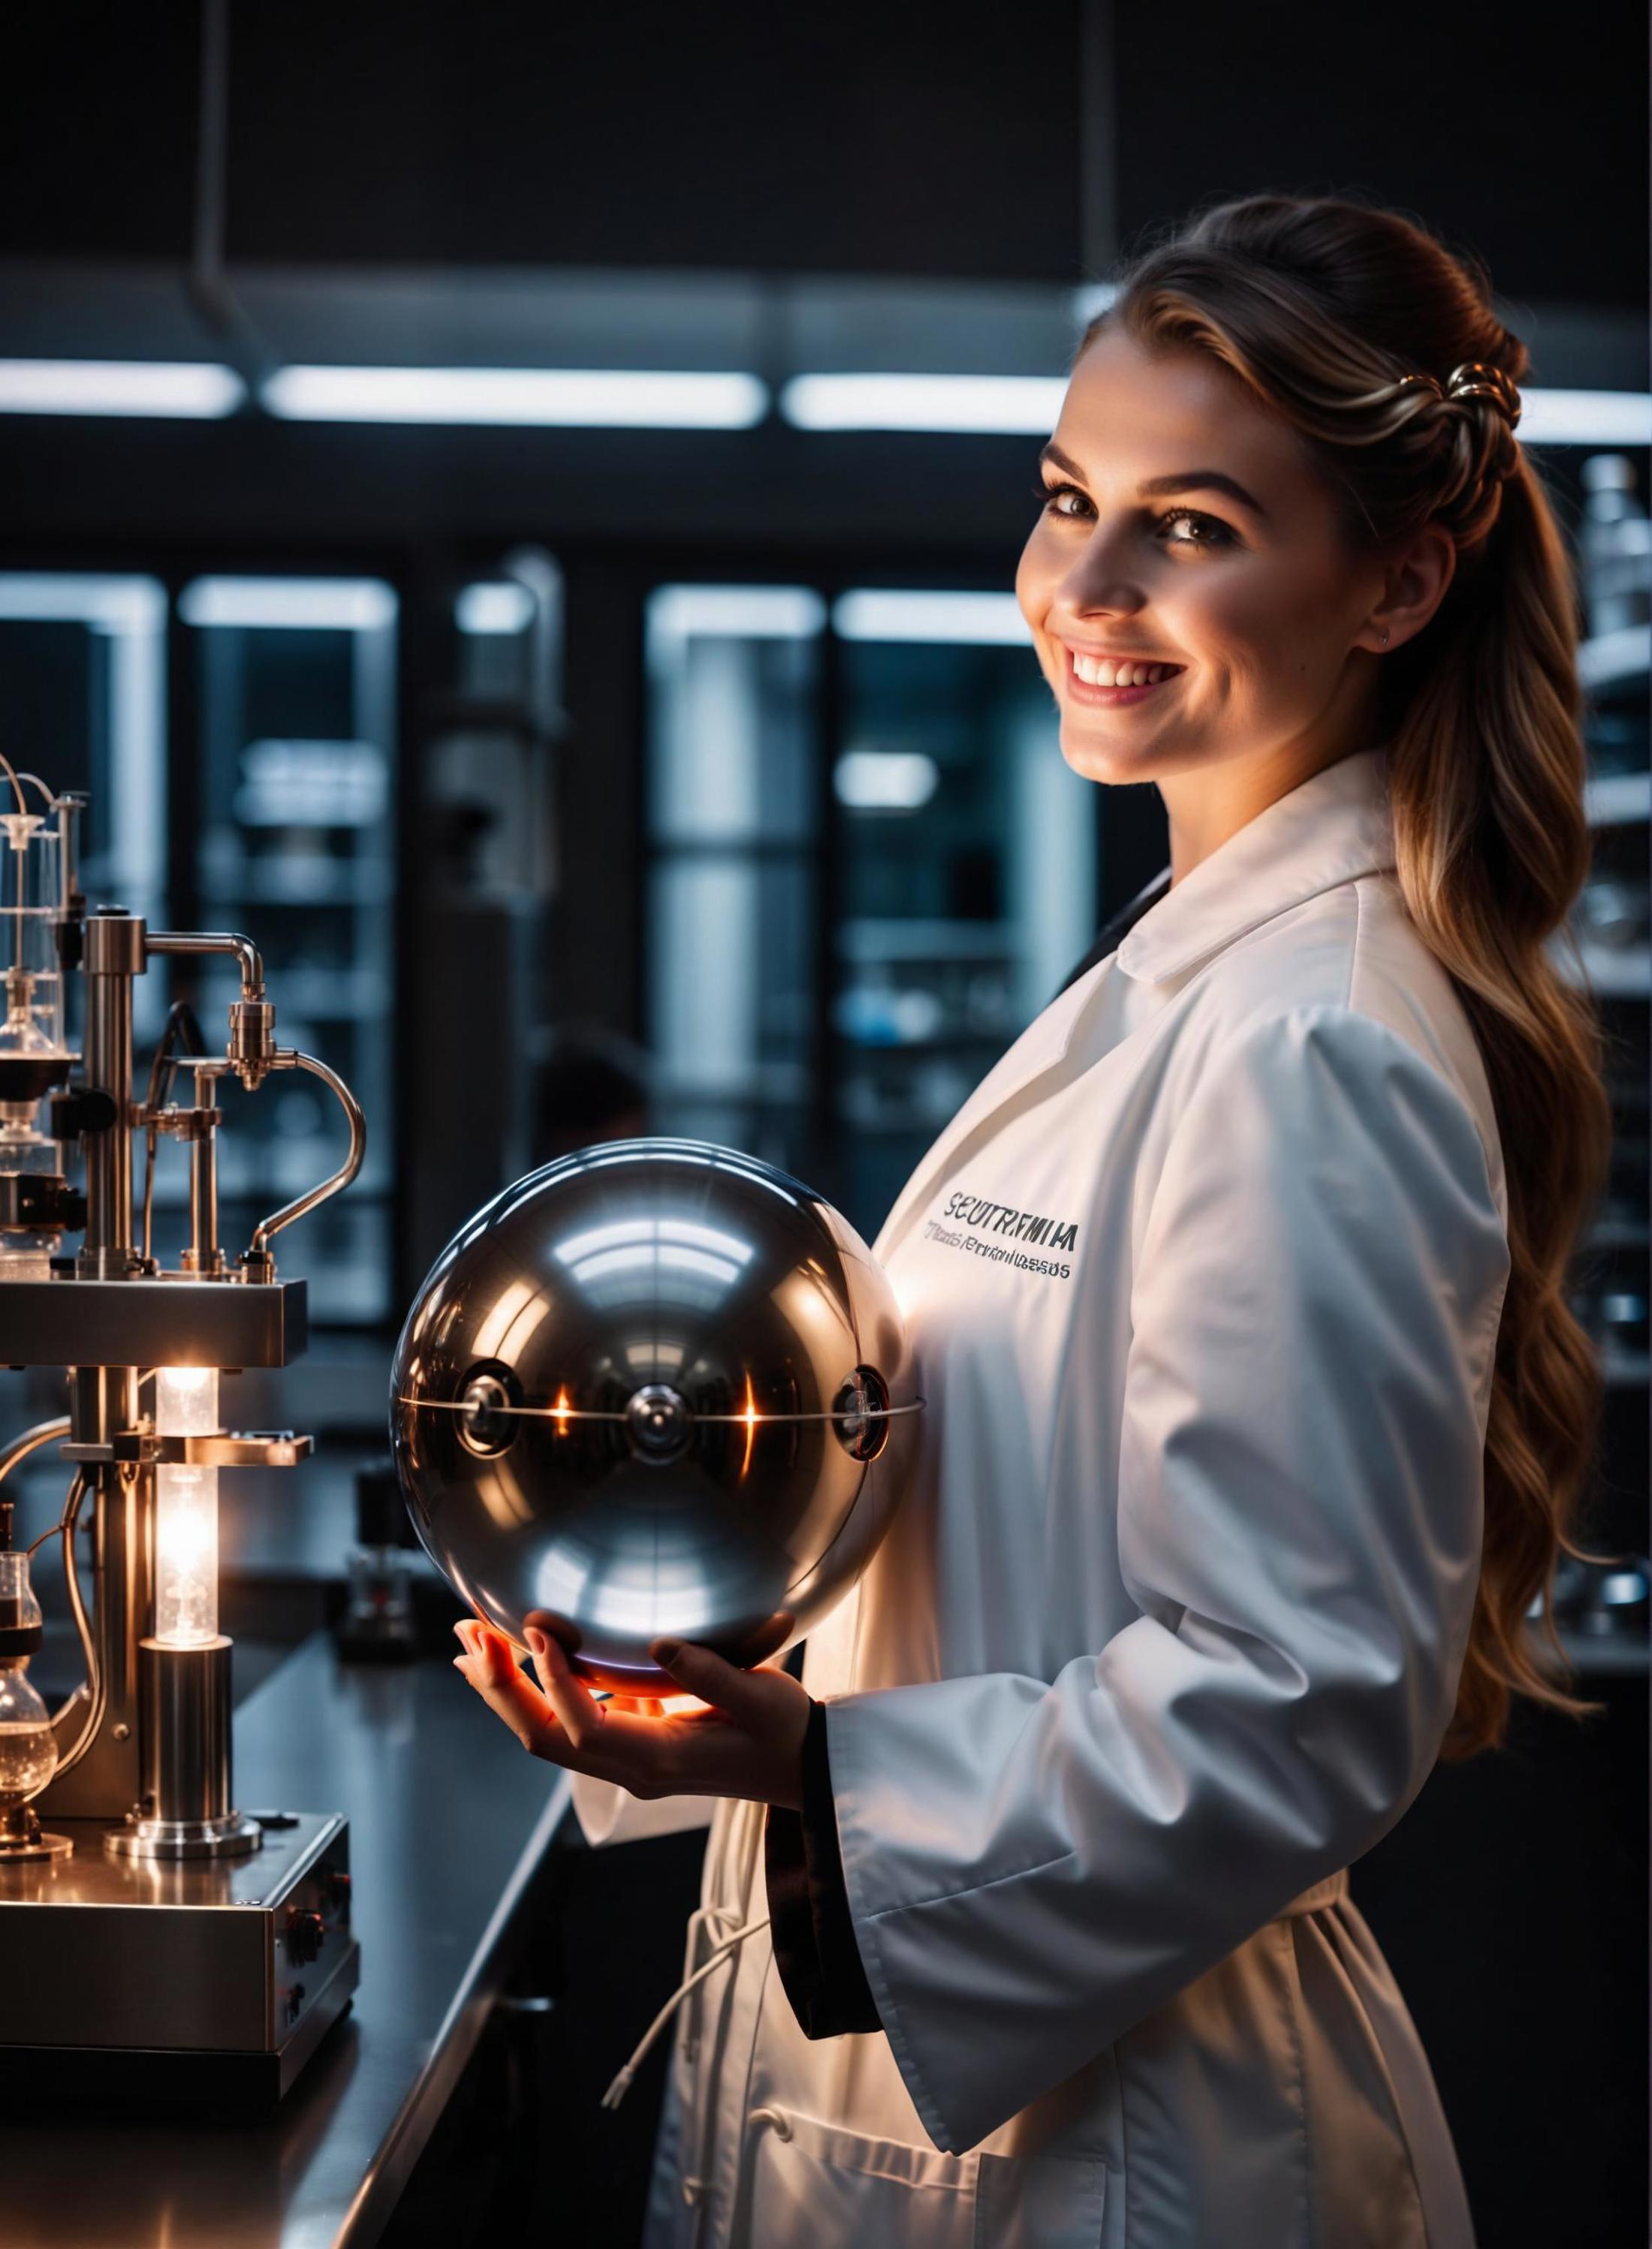 Smiling woman in white lab coat holding a silver sphere.